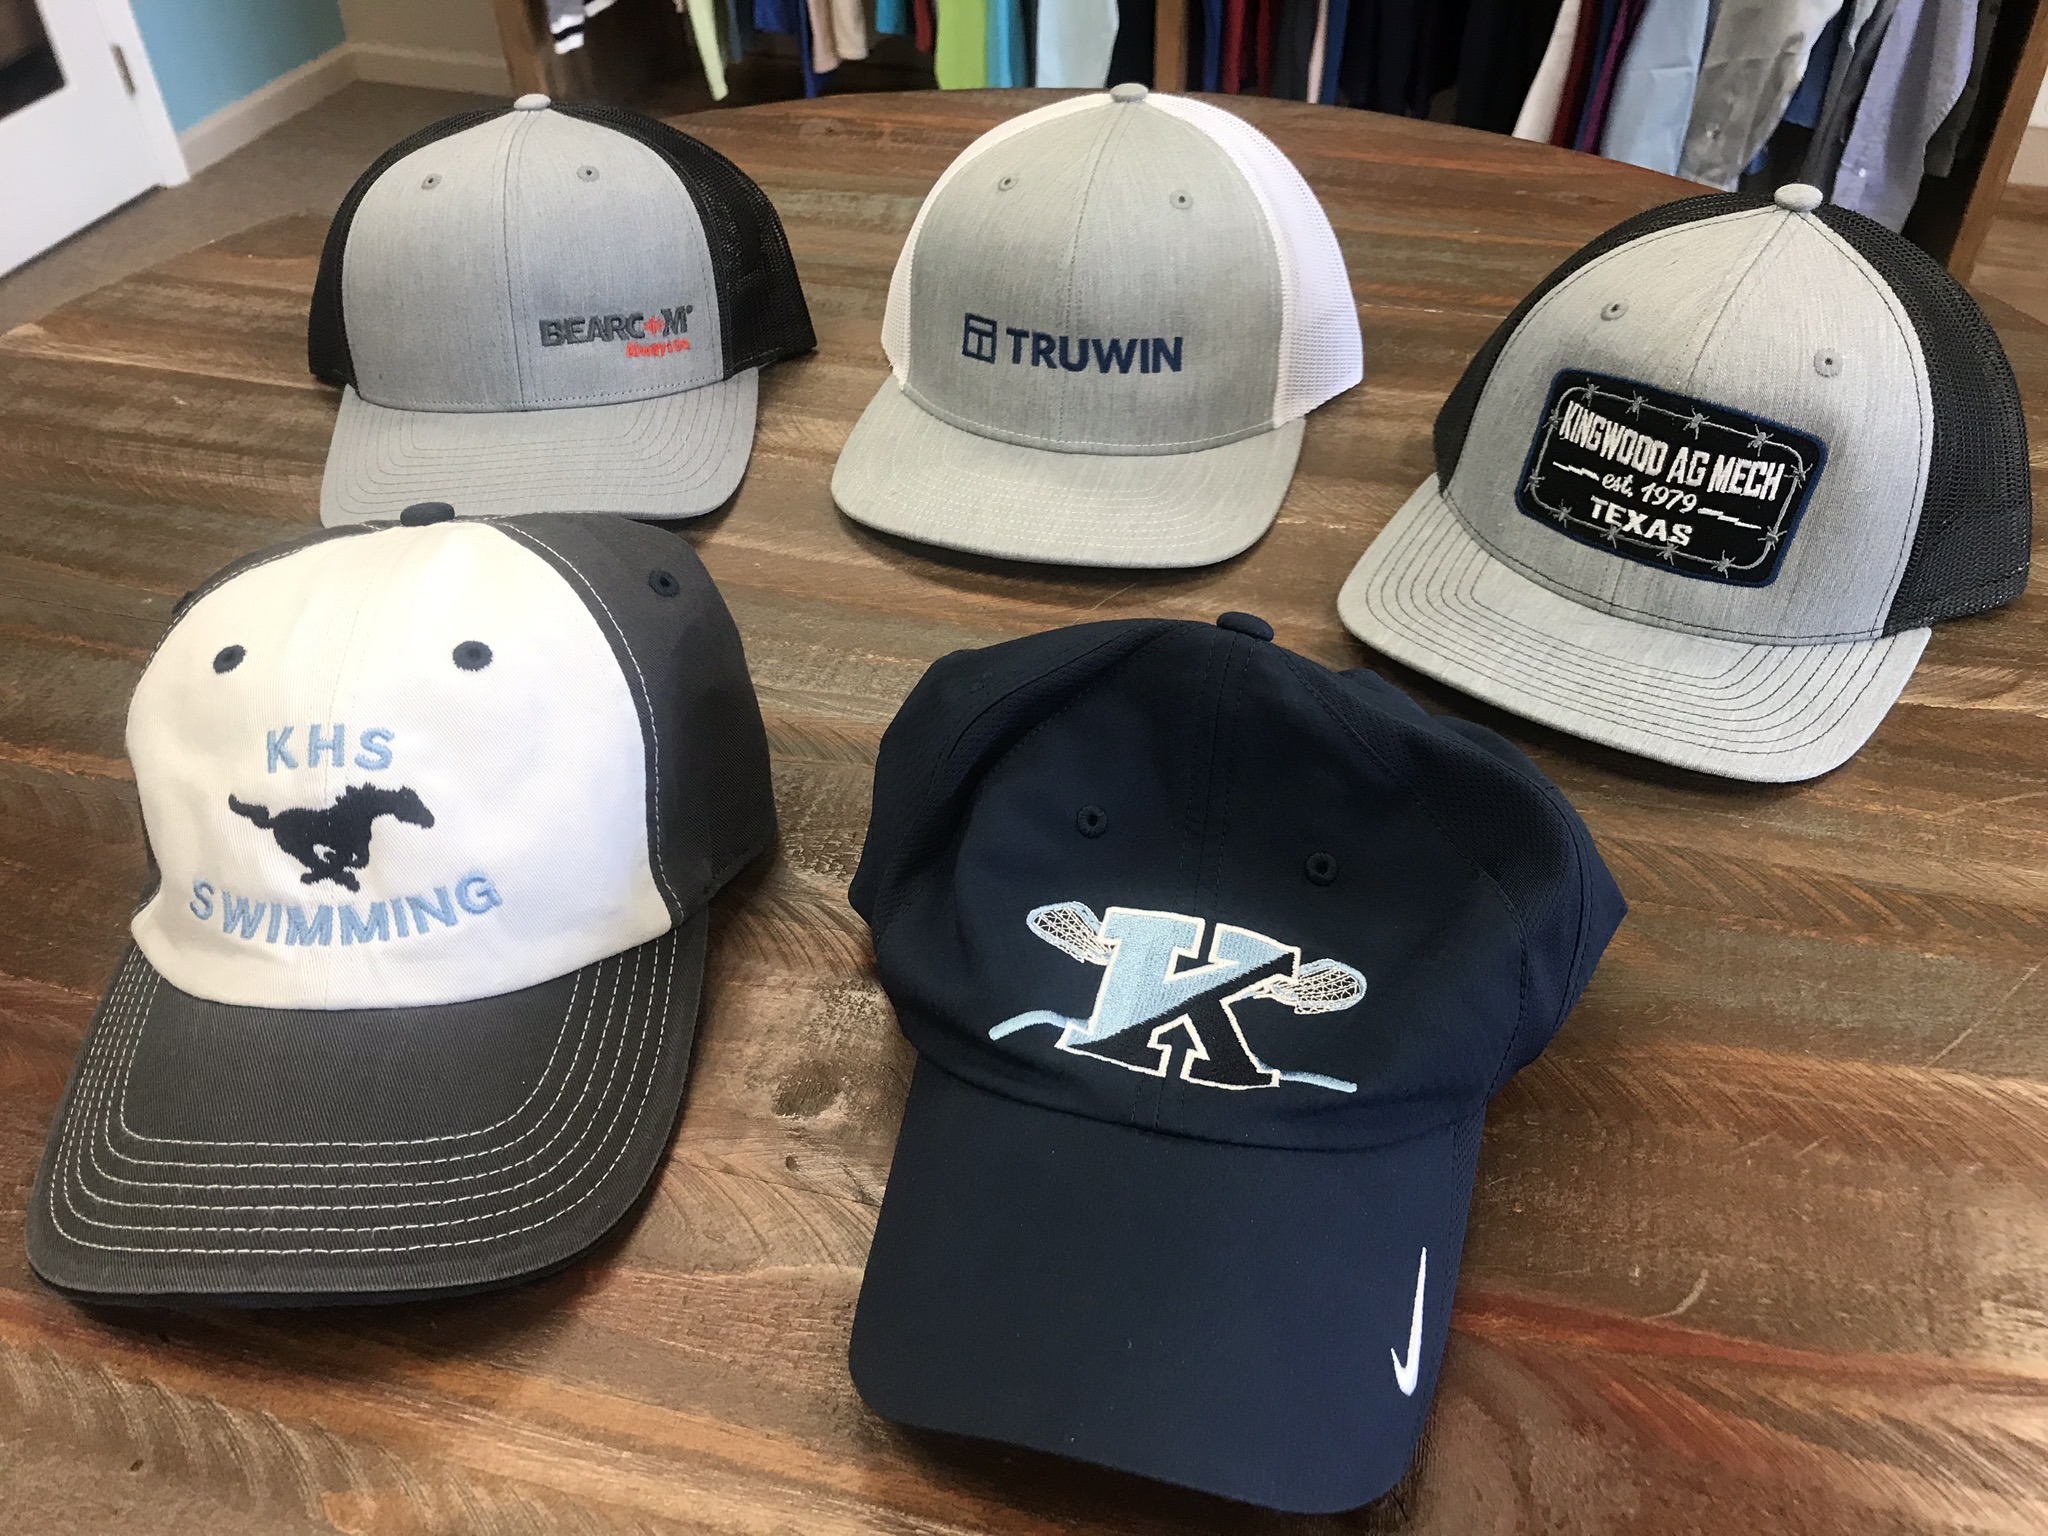 Logo embroidered caps by K&S Sportswear.